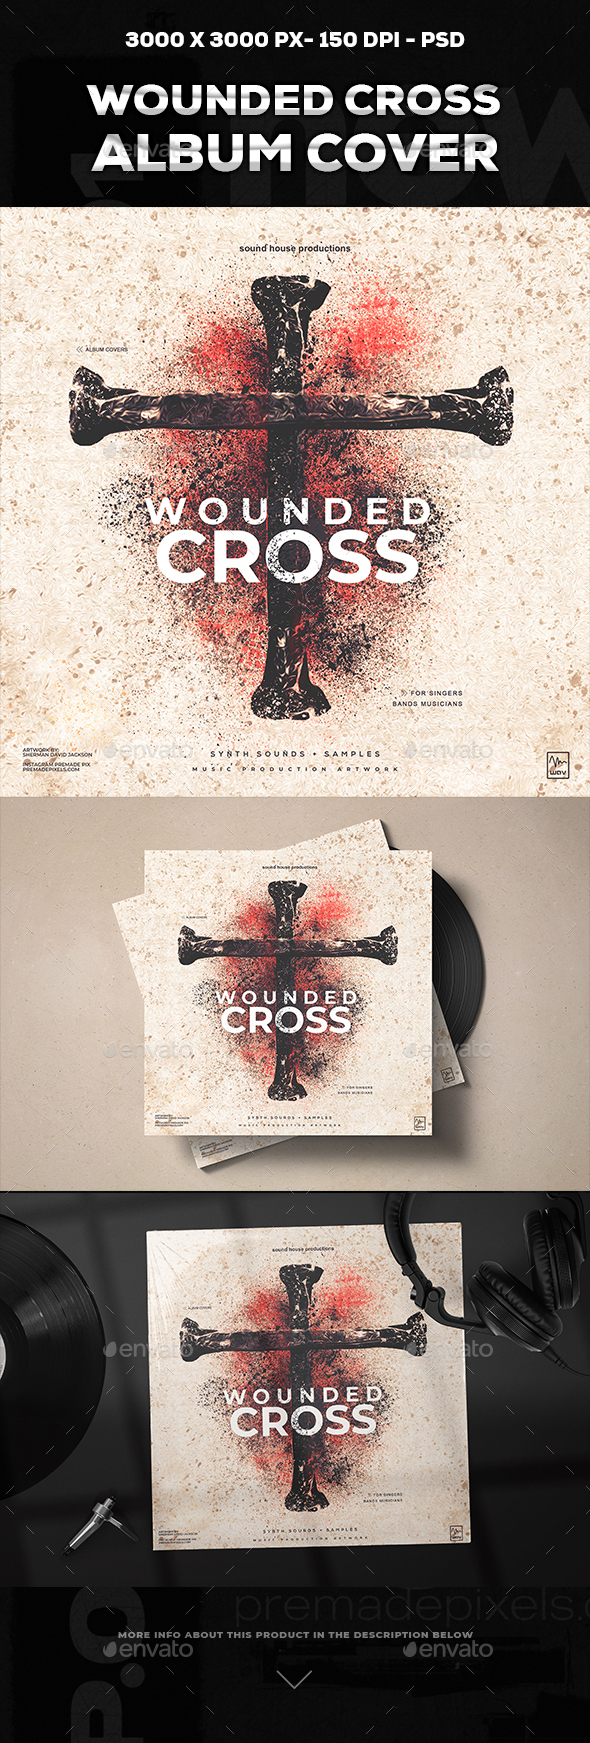 [DOWNLOAD]Wounded Cross Album Cover